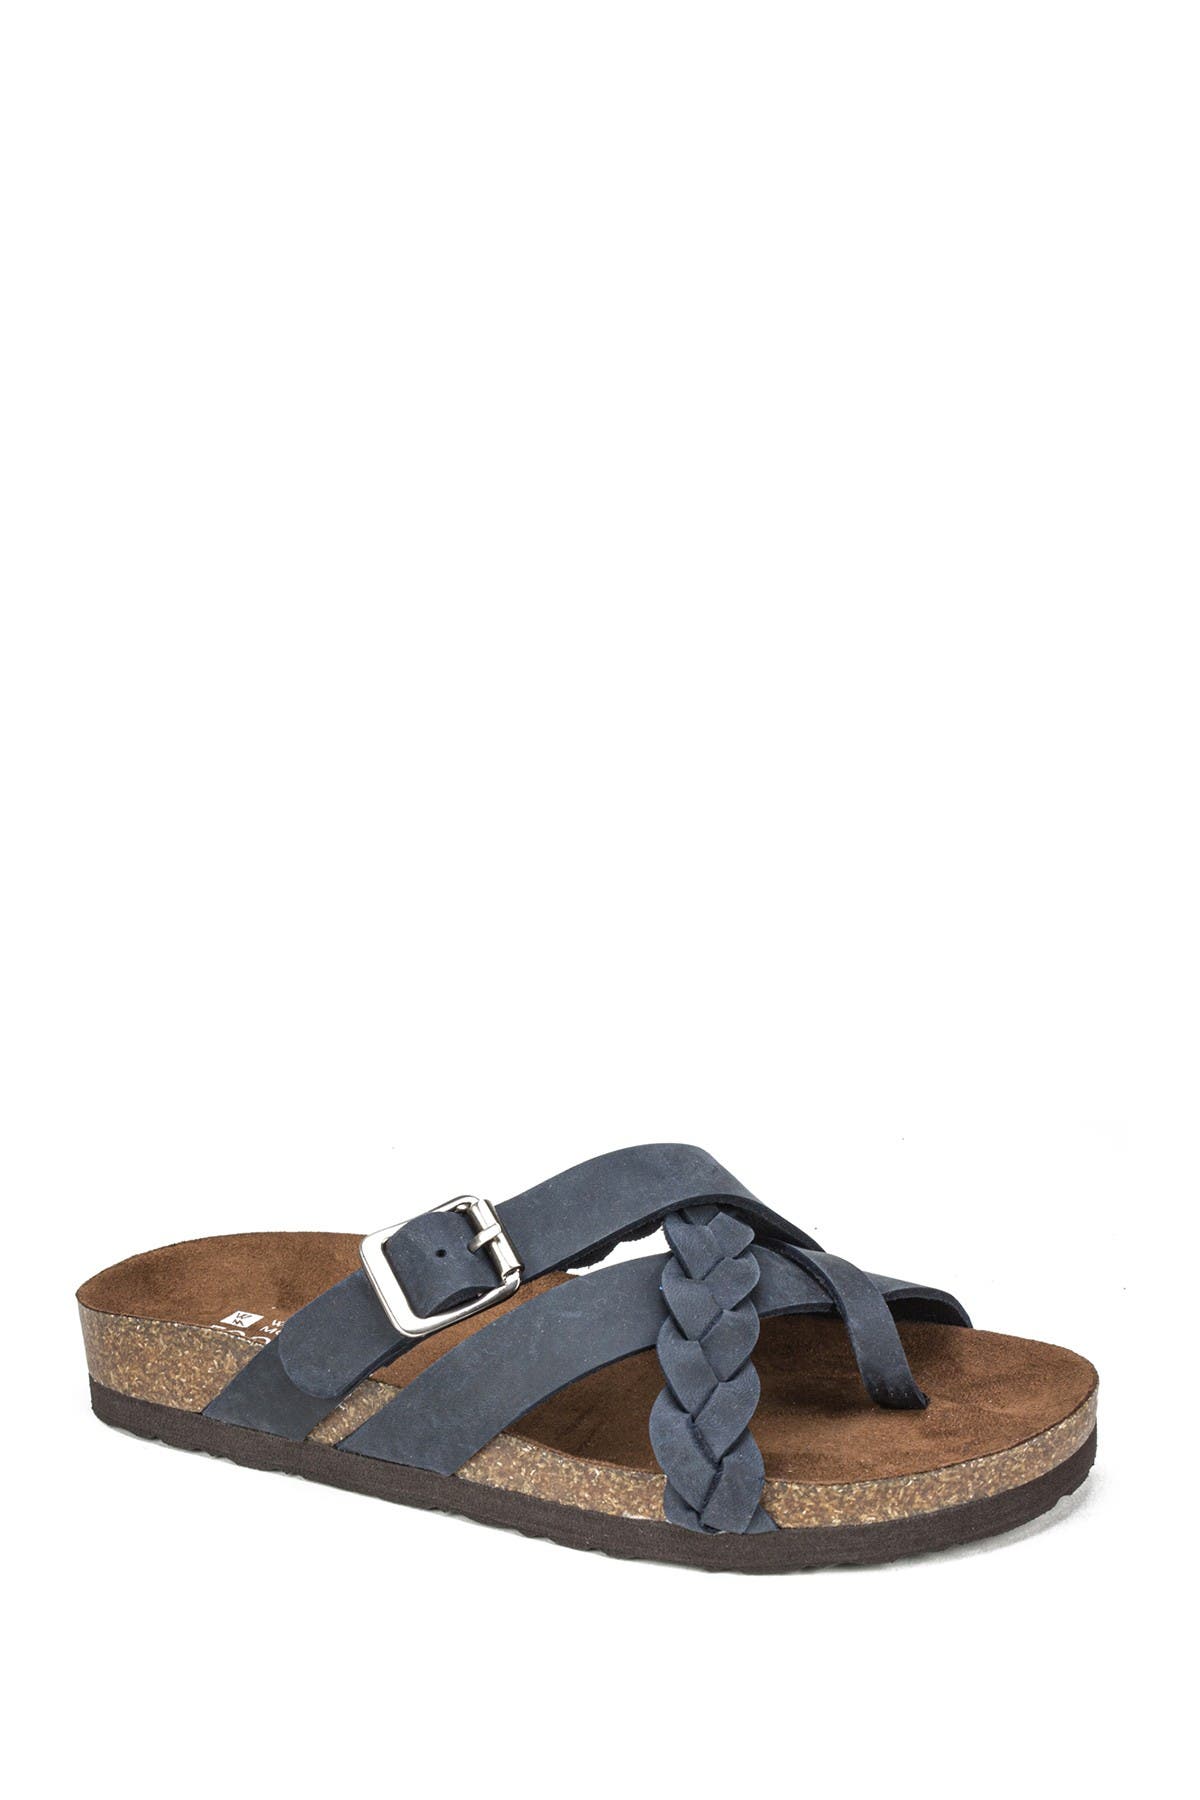 White Mountain Footwear Harrington Leather Footbed Sandal In Navy/leather